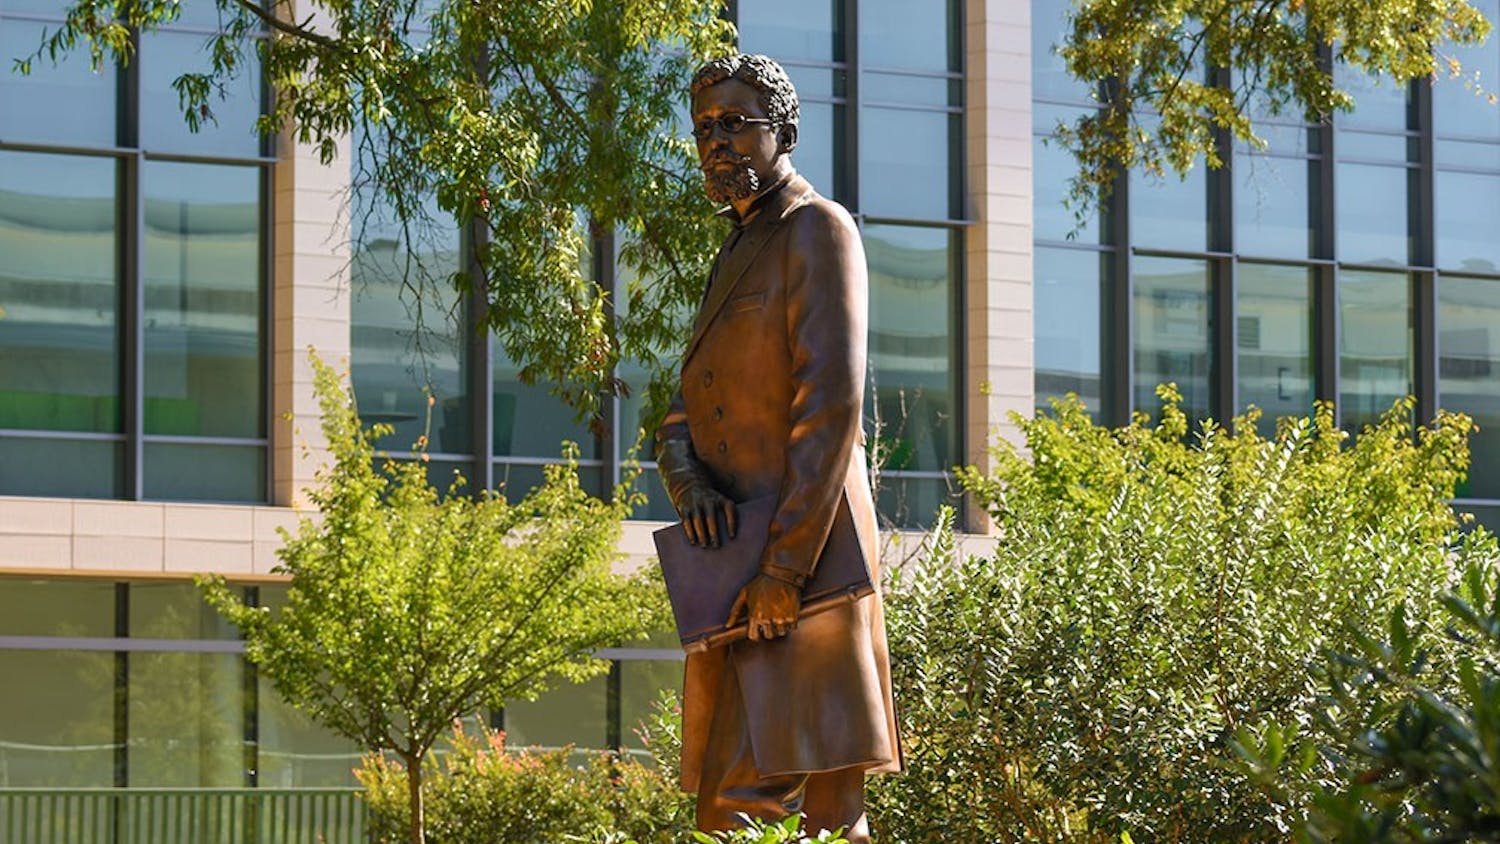 The Richard T. Greener memorial created by John Hair in 2013, situated outside of the Thomas Cooper Library. The statue commemorates Greener, who was the university's first Black professor and a lawyer, scholar, librarian and activist.&nbsp;